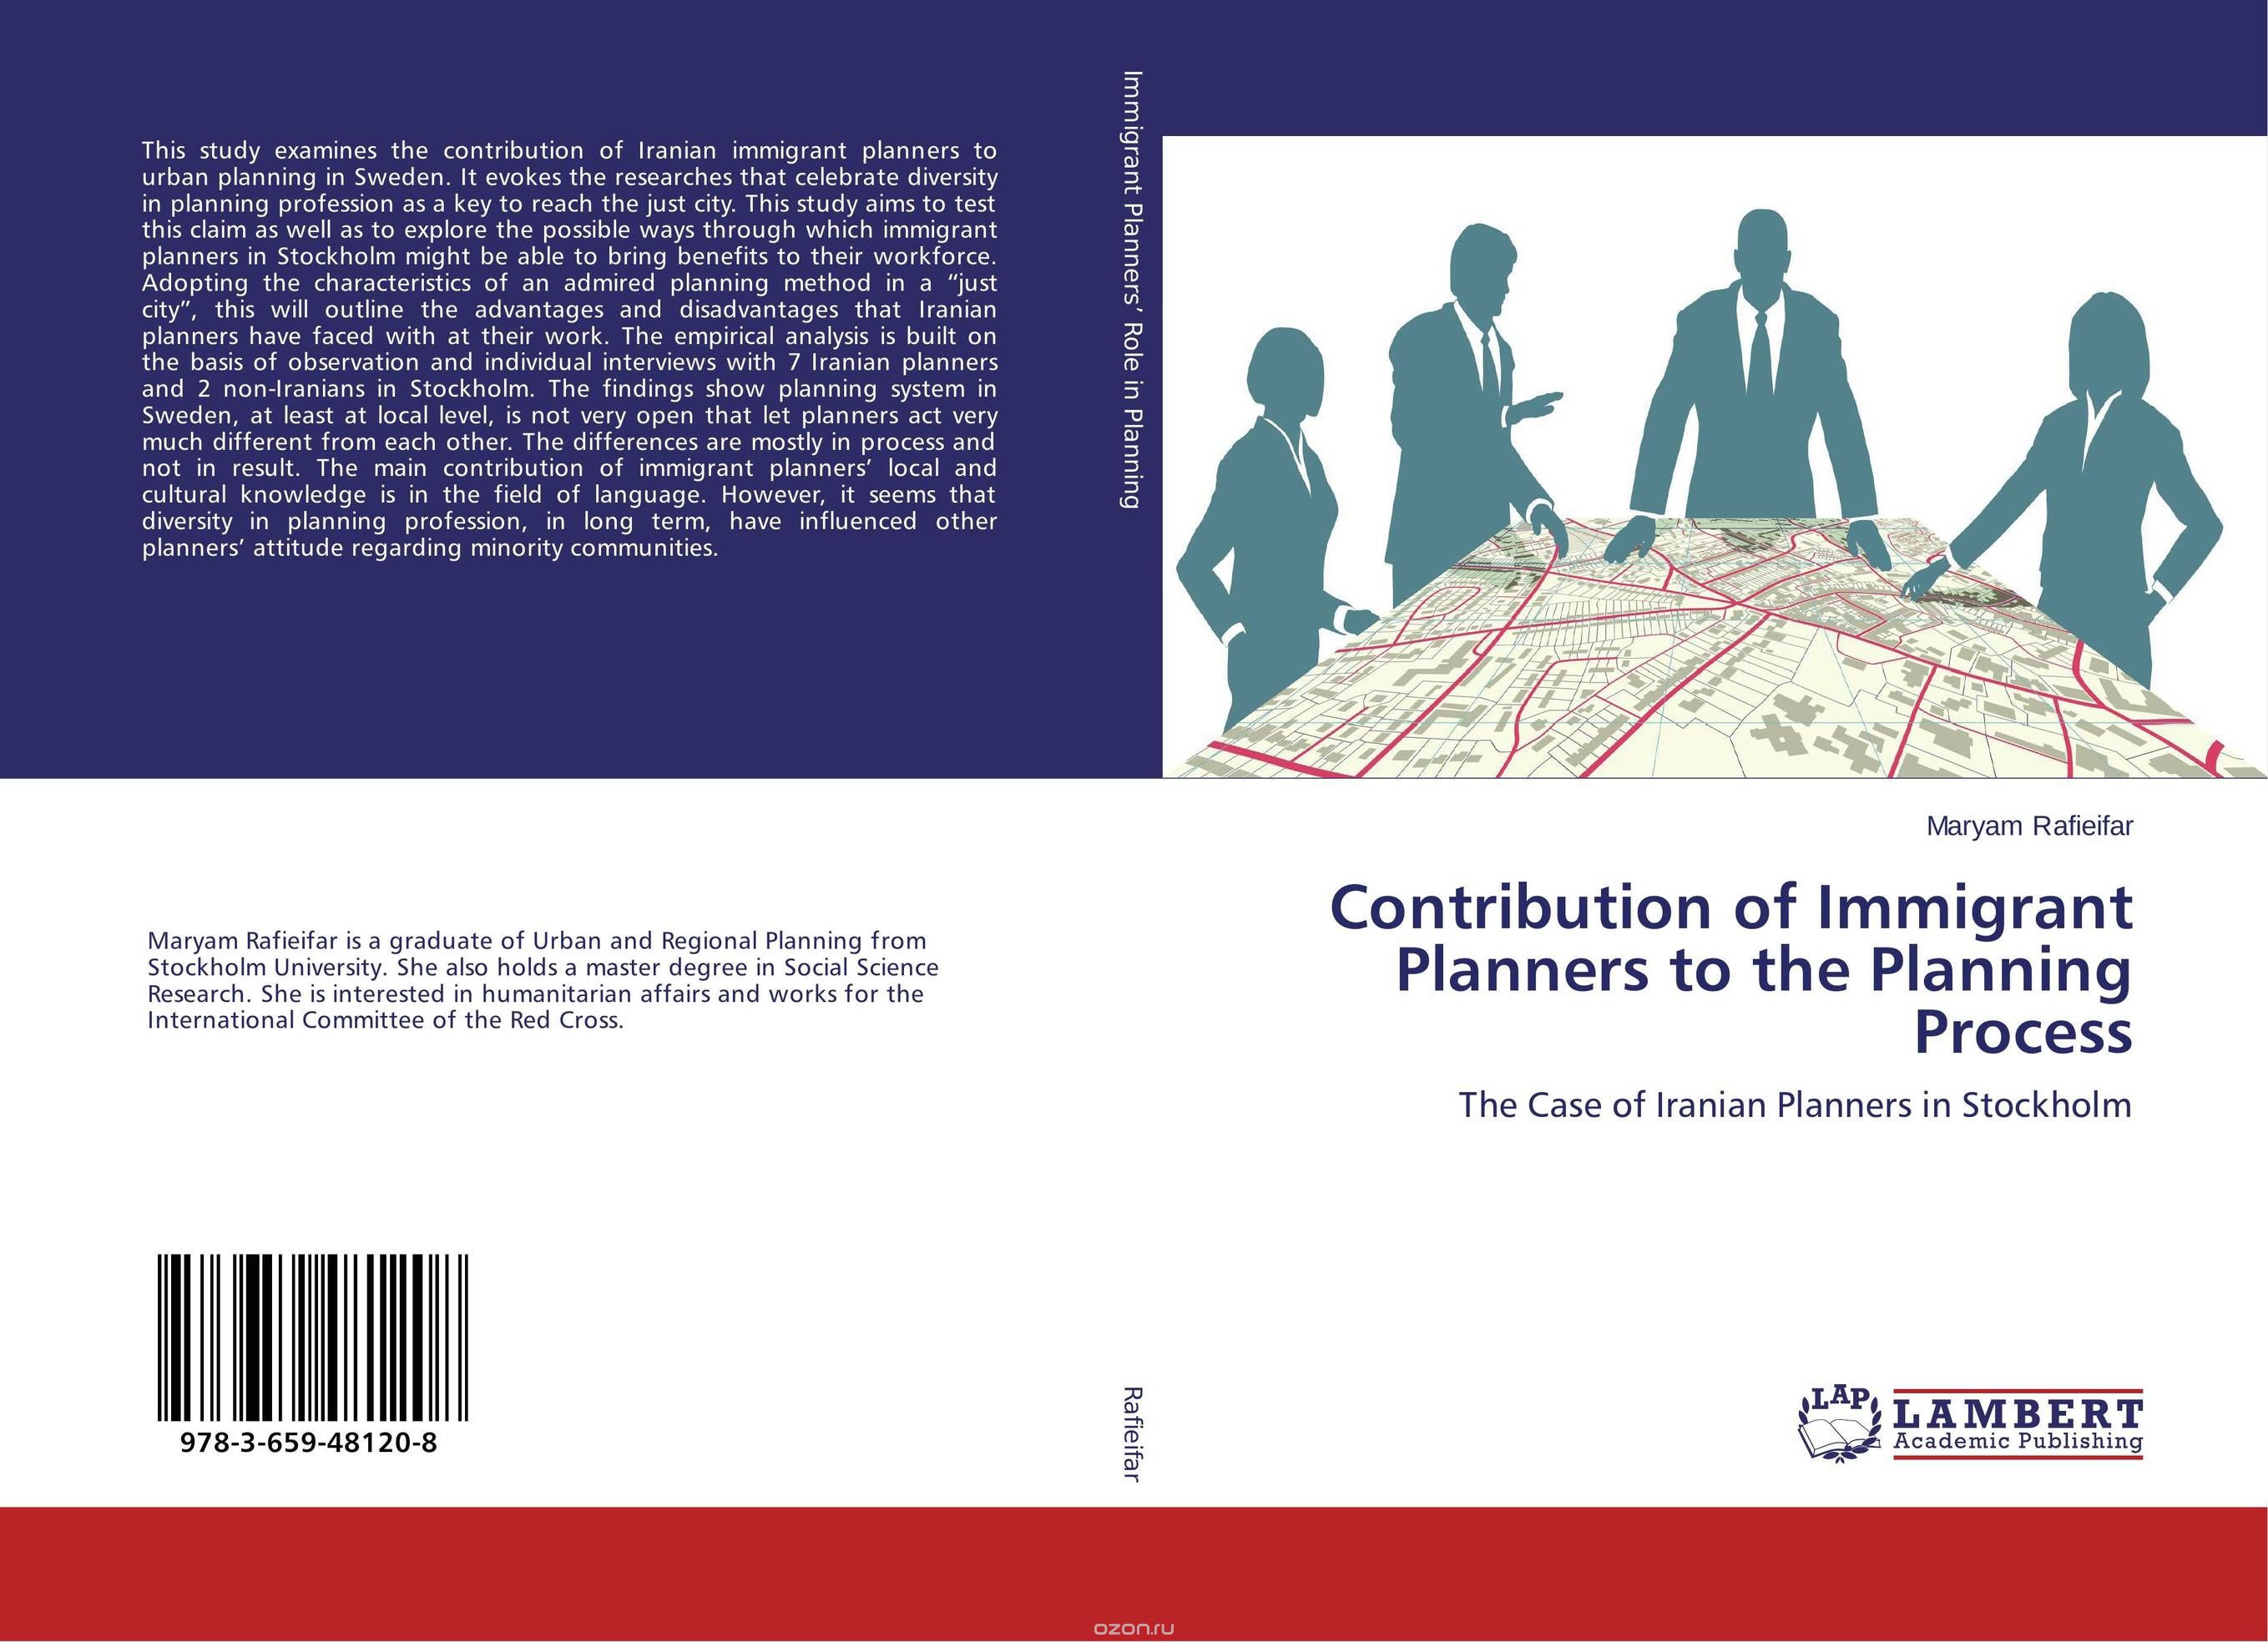 Скачать книгу "Contribution of Immigrant Planners to the Planning Process"